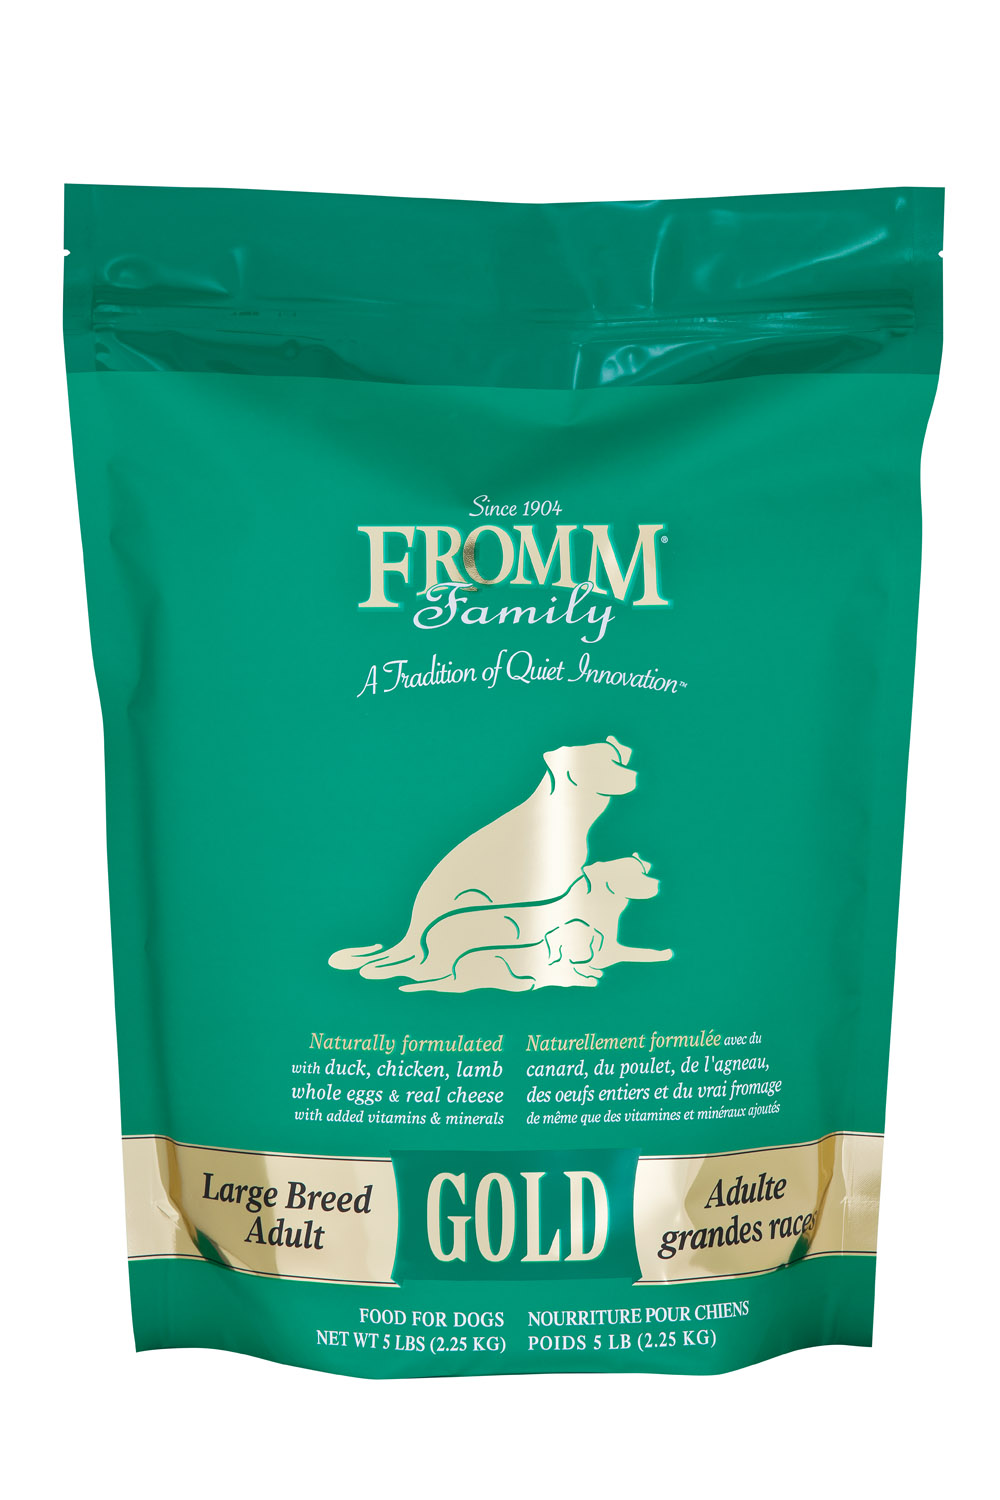 Fromm Family Large Breed Adult Gold Food for Dogs, 5 lbs